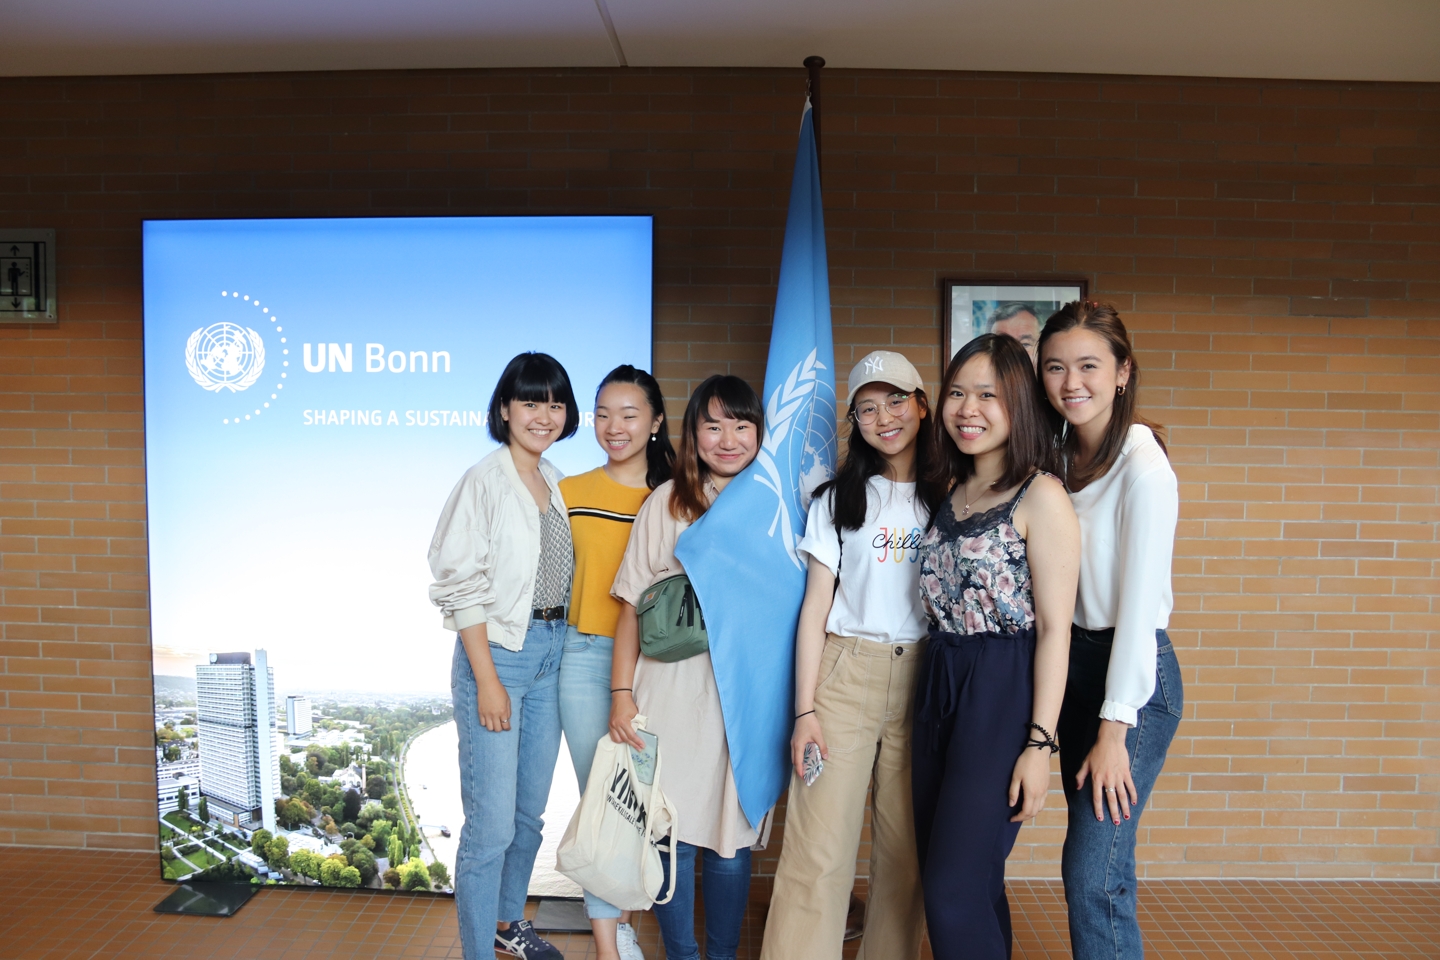 Six students with the flag of the united nations.